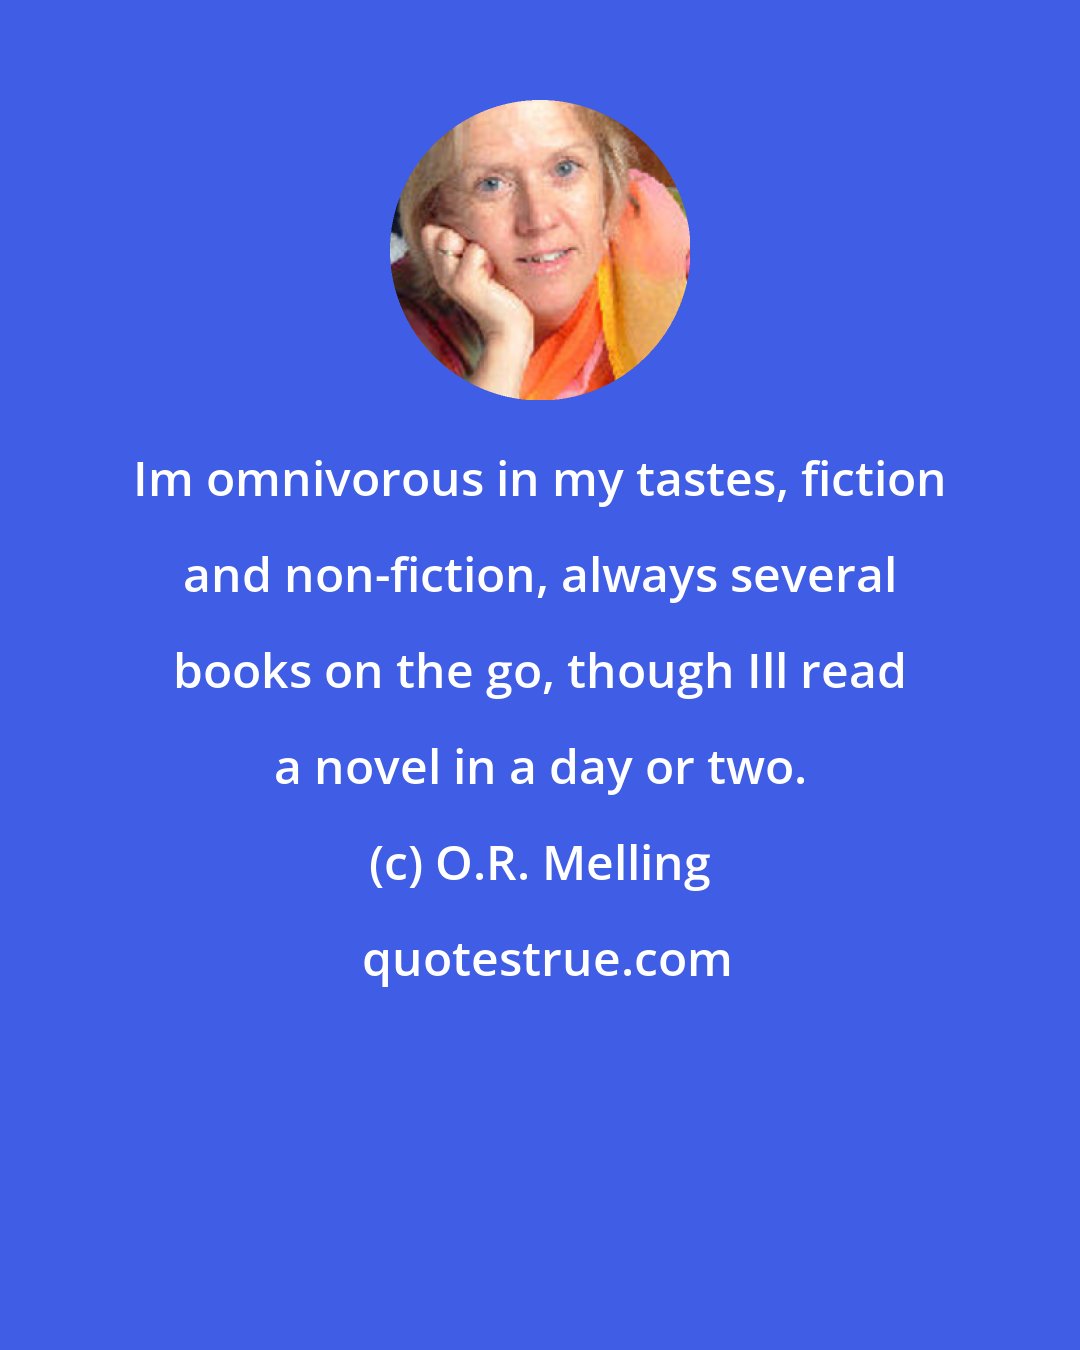 O.R. Melling: Im omnivorous in my tastes, fiction and non-fiction, always several books on the go, though Ill read a novel in a day or two.